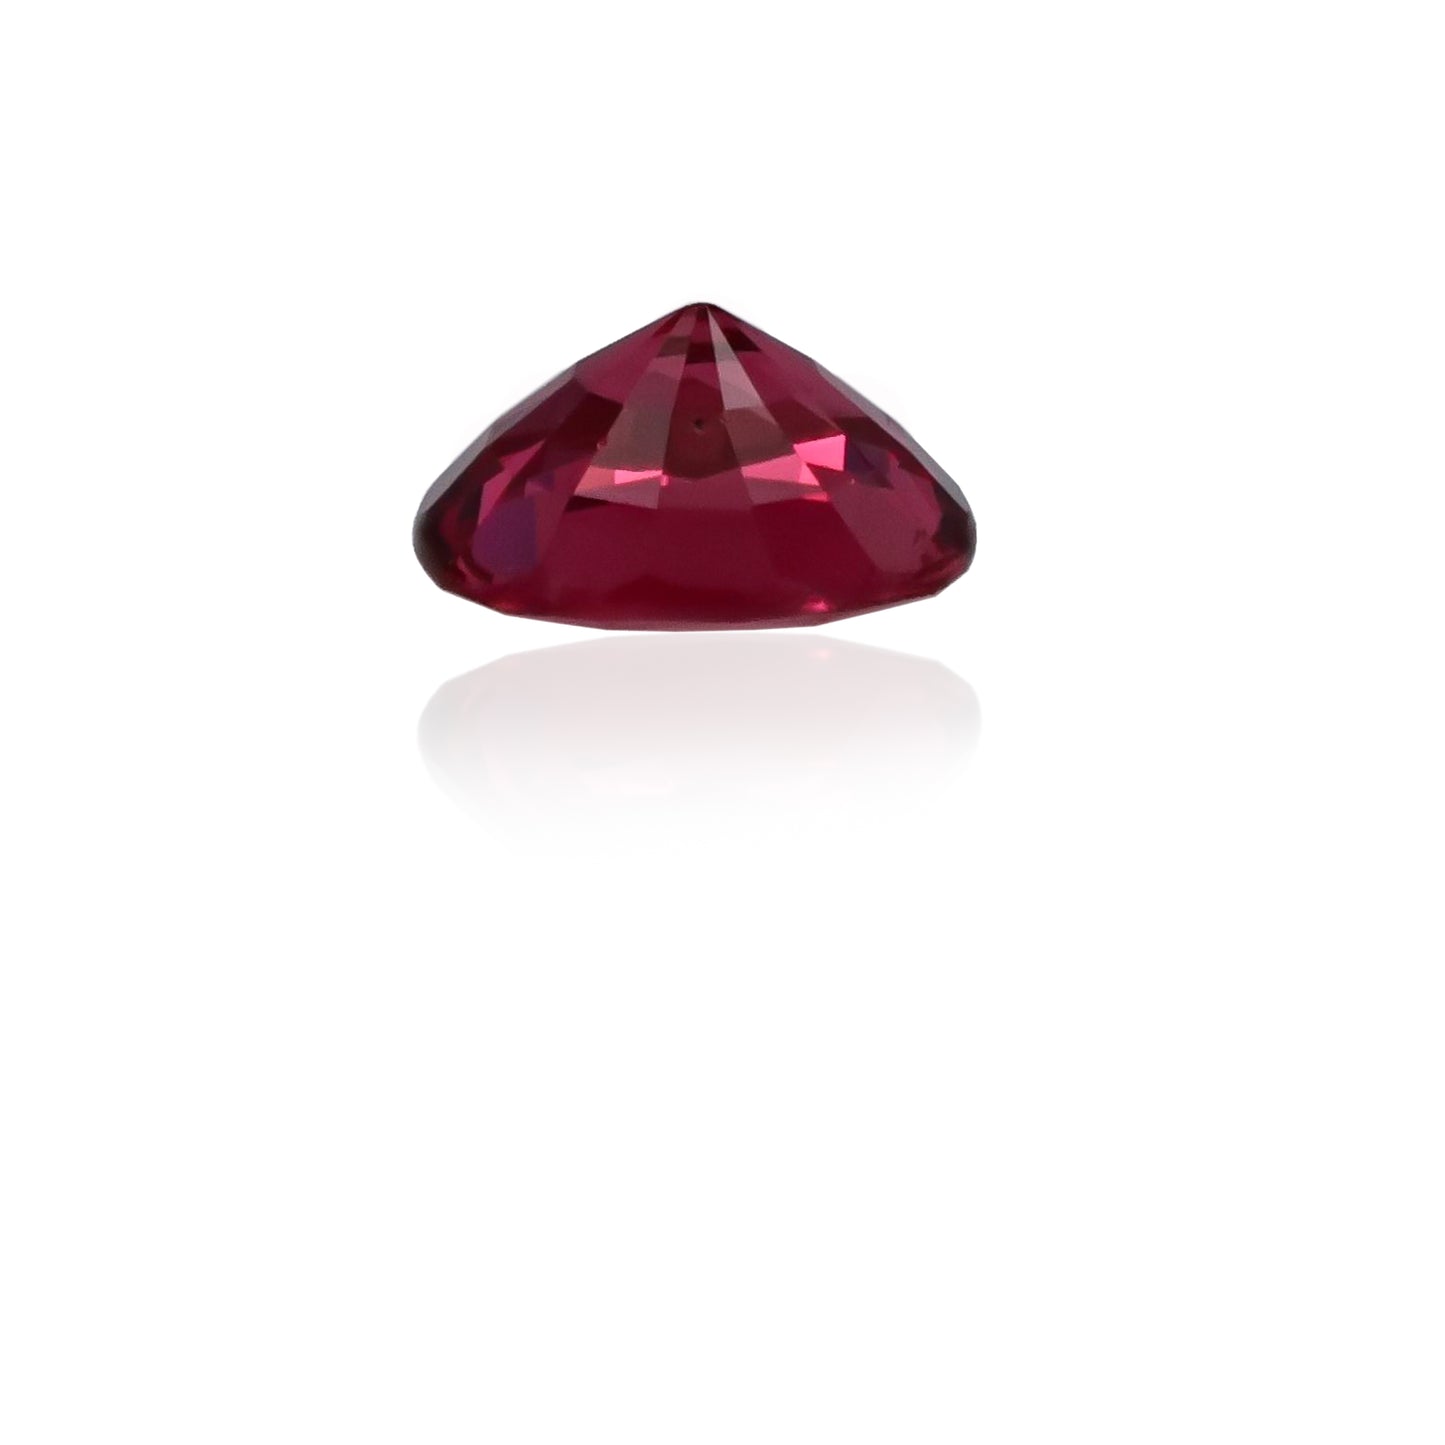 Natural Red Spinel 2.12 Carats with GIA Report